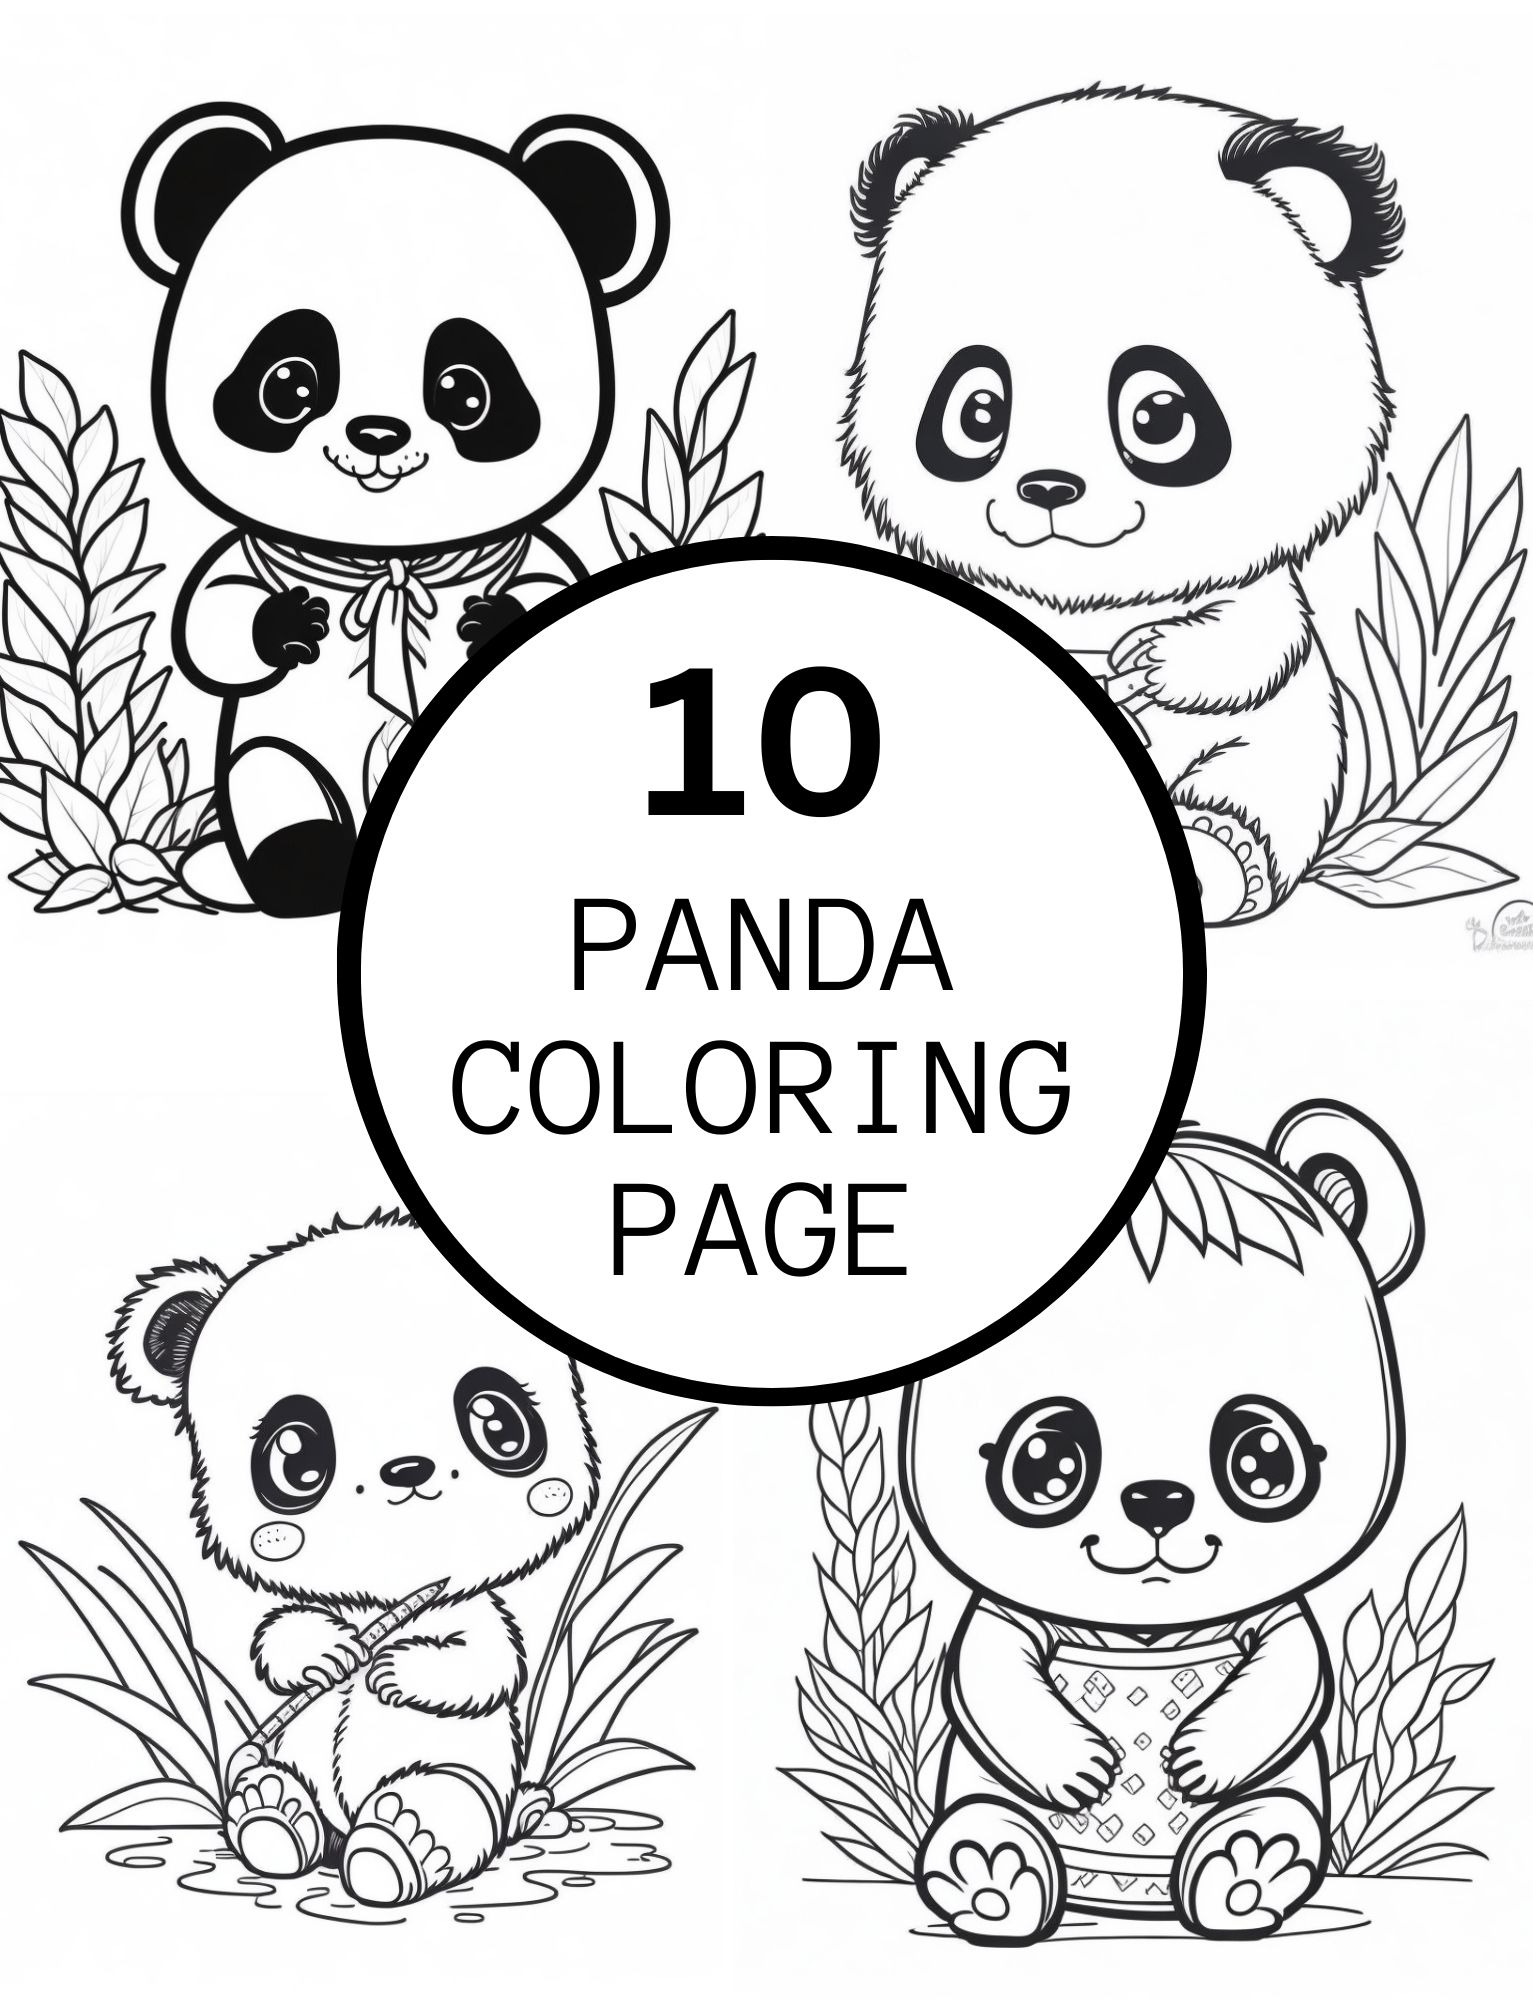 Realistic panda coloring pages for kids and adults made by teachers